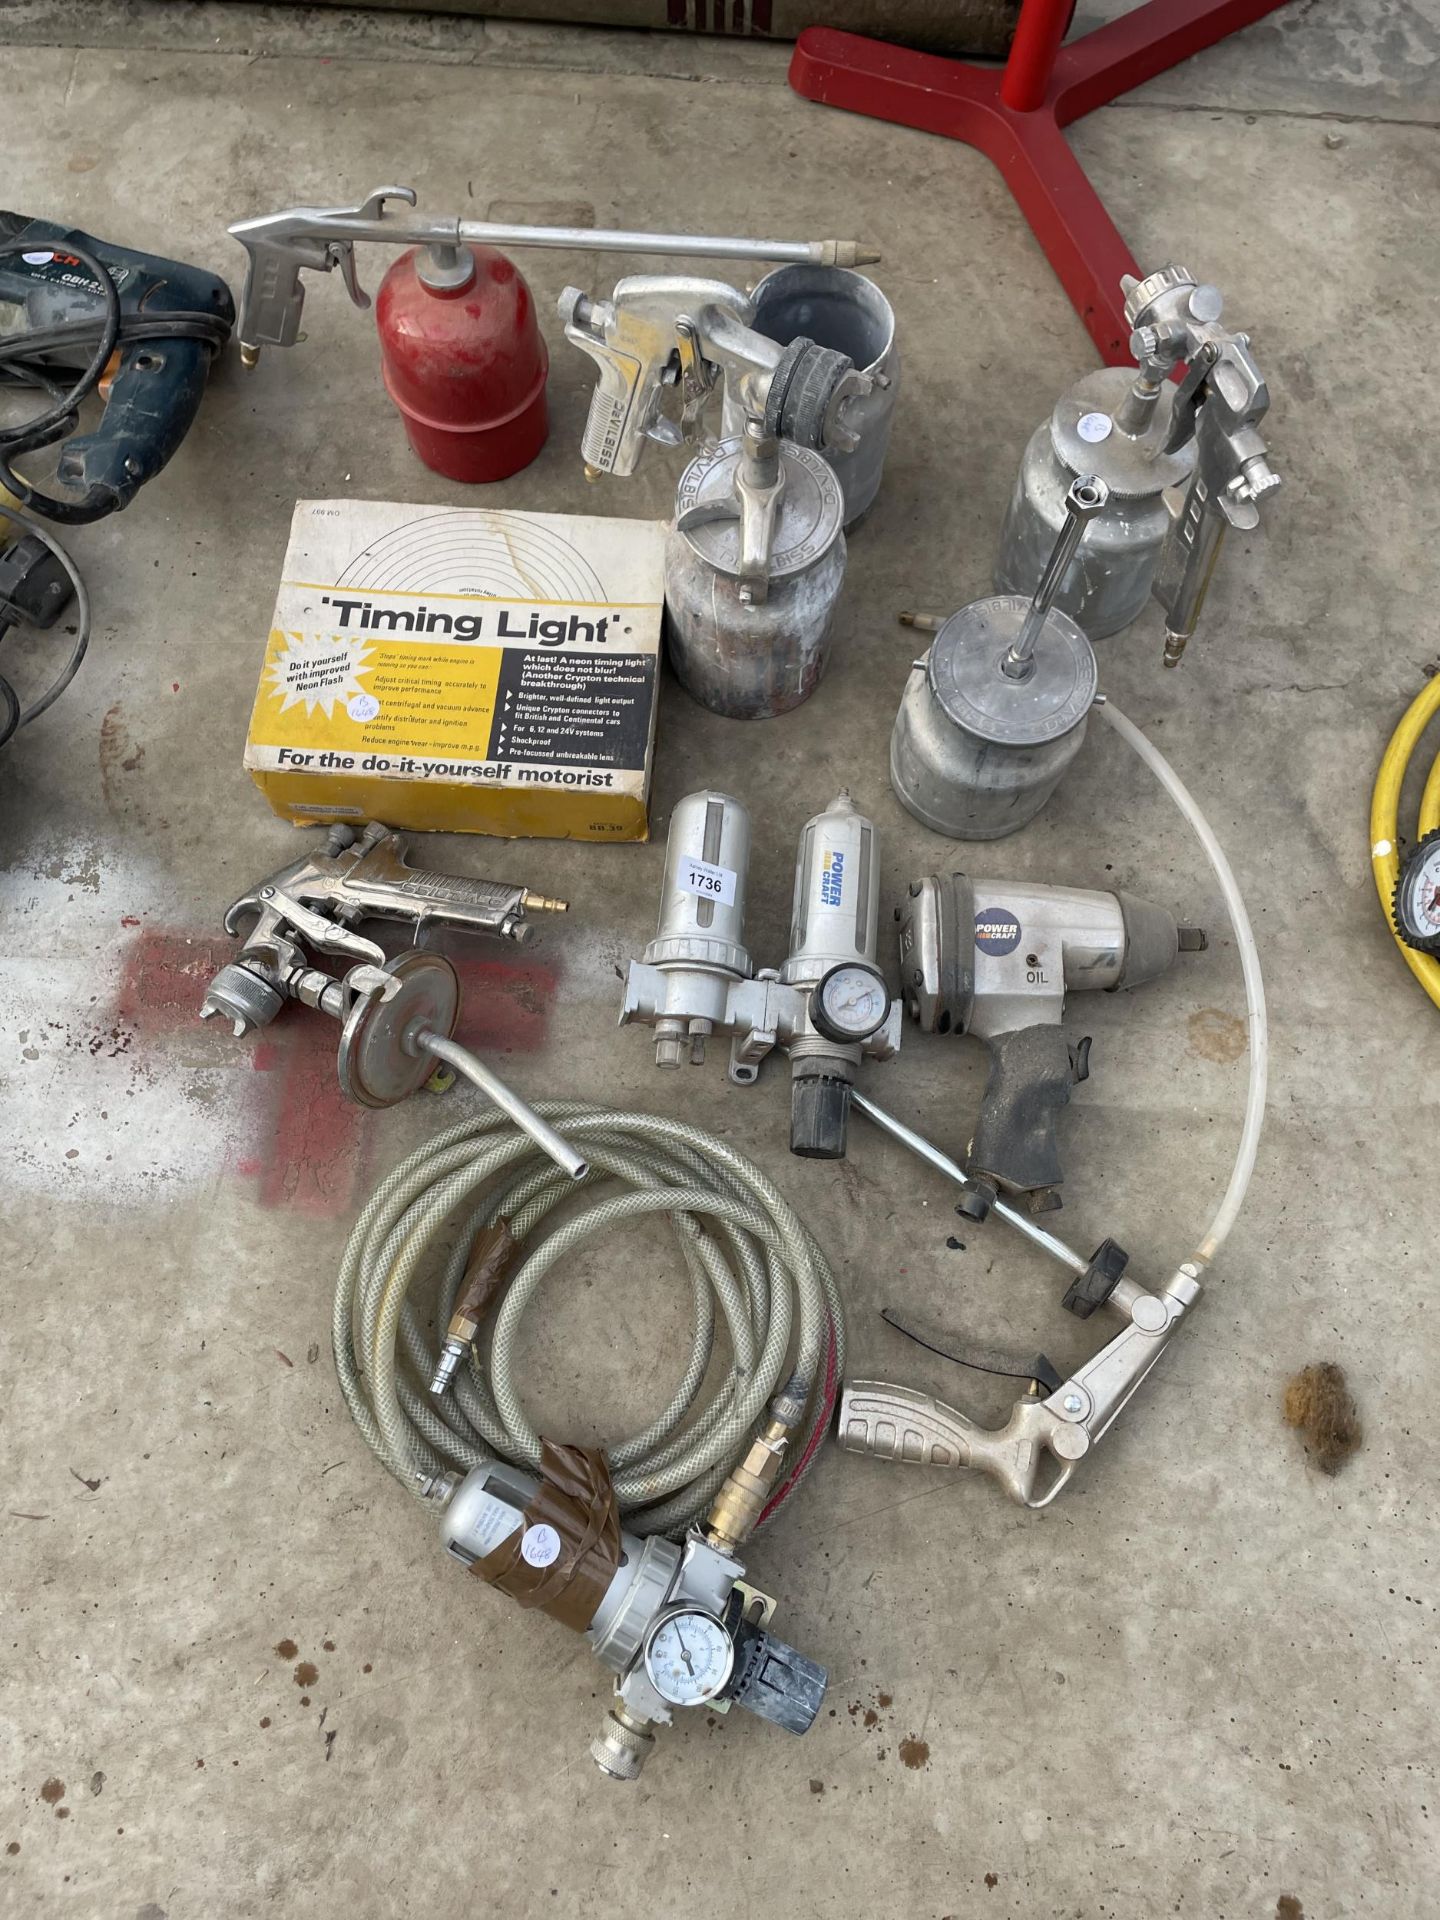 AN ASSORTMENT OF AIR COMPRESSER ATTATCHMENTS TO INCLUDE PAINT SPRAYERS AND AN IMPACT WRENCH ETC